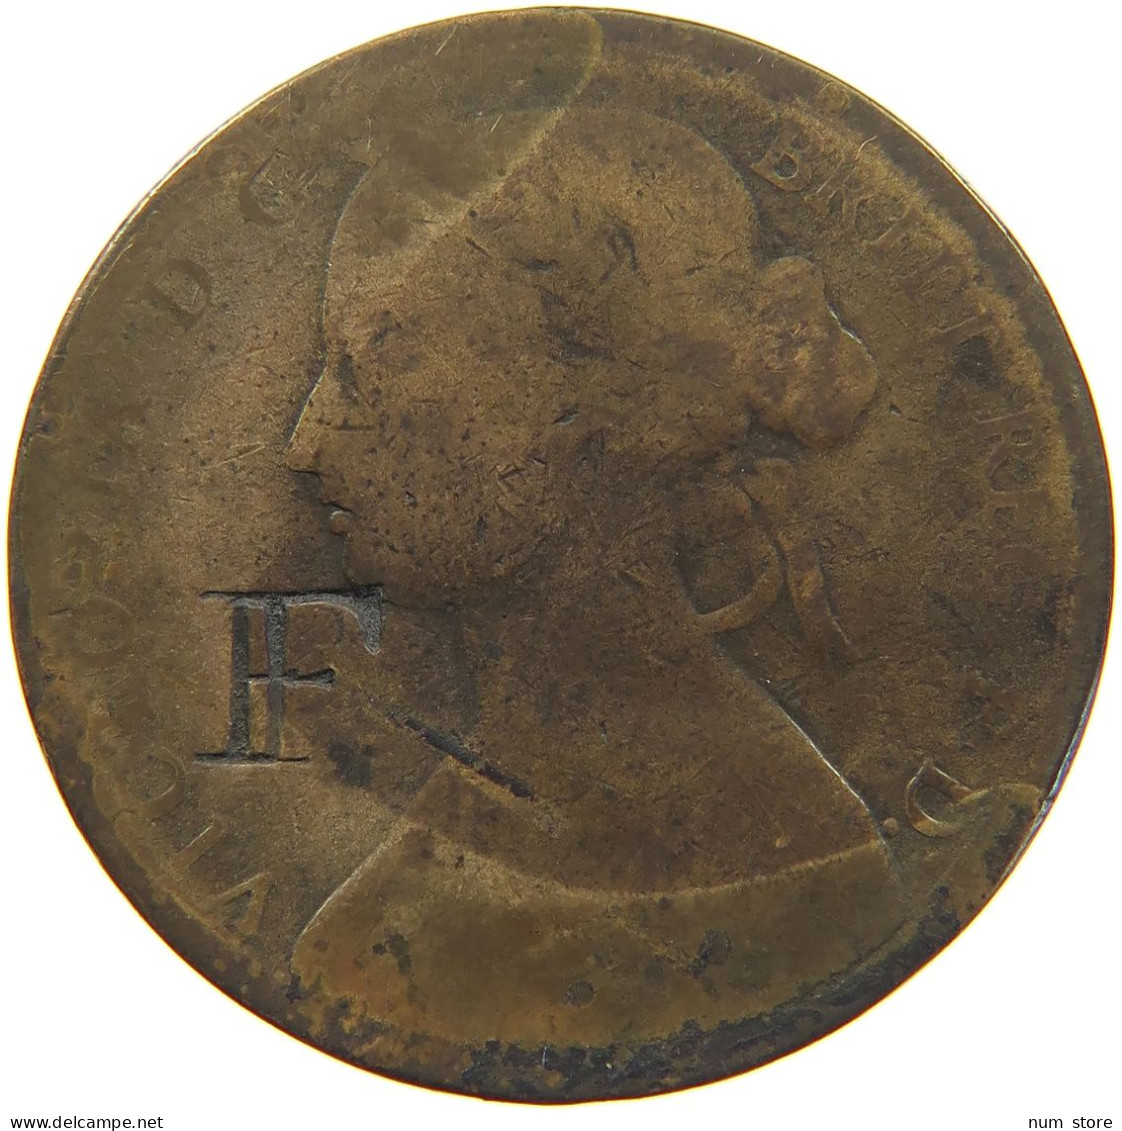 GREAT BRITAIN PENNY 1860 Victoria 1837-1901 COUNTERMARKED FF #c033 0293 - D. 1 Penny